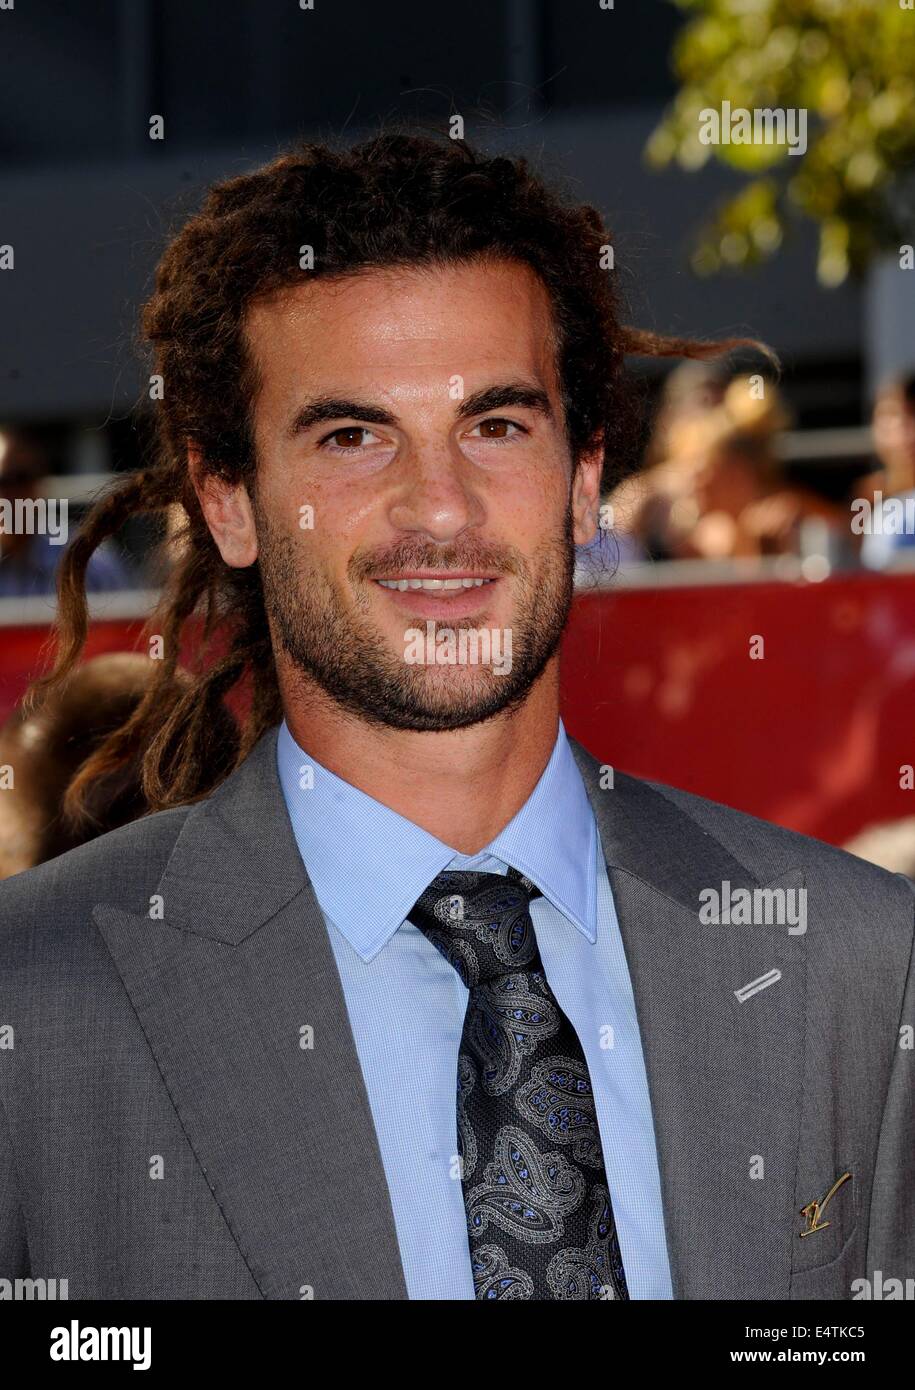 Los Angeles, CA, USA. 16th July, 2014. Kyle Beckerman at arrivals for The 2014 ESPYS - Arrivals, Nokia Theatre L.A. LIVE, Los Angeles, CA July 16, 2014. Credit:  Elizabeth Goodenough/Everett Collection/Alamy Live News Stock Photo